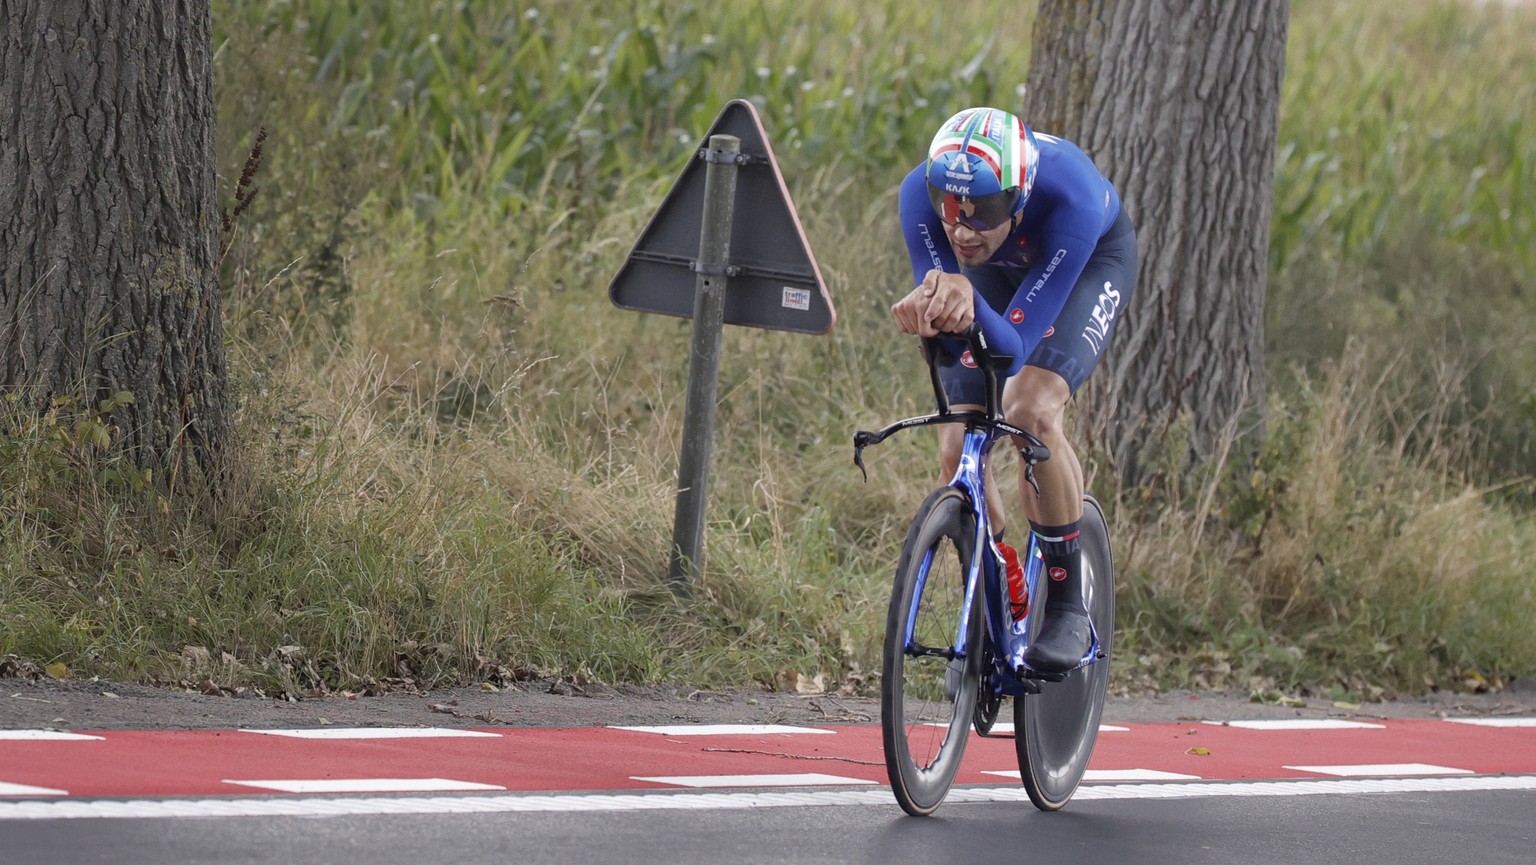 Filippo Ganna of Italy competes to win the Men Elite individual time trial race at the World Road Cycling Championships in Bruges, Belgium, Sunday Sept. 19, 2021. (AP Photo/Olivier Matthys)